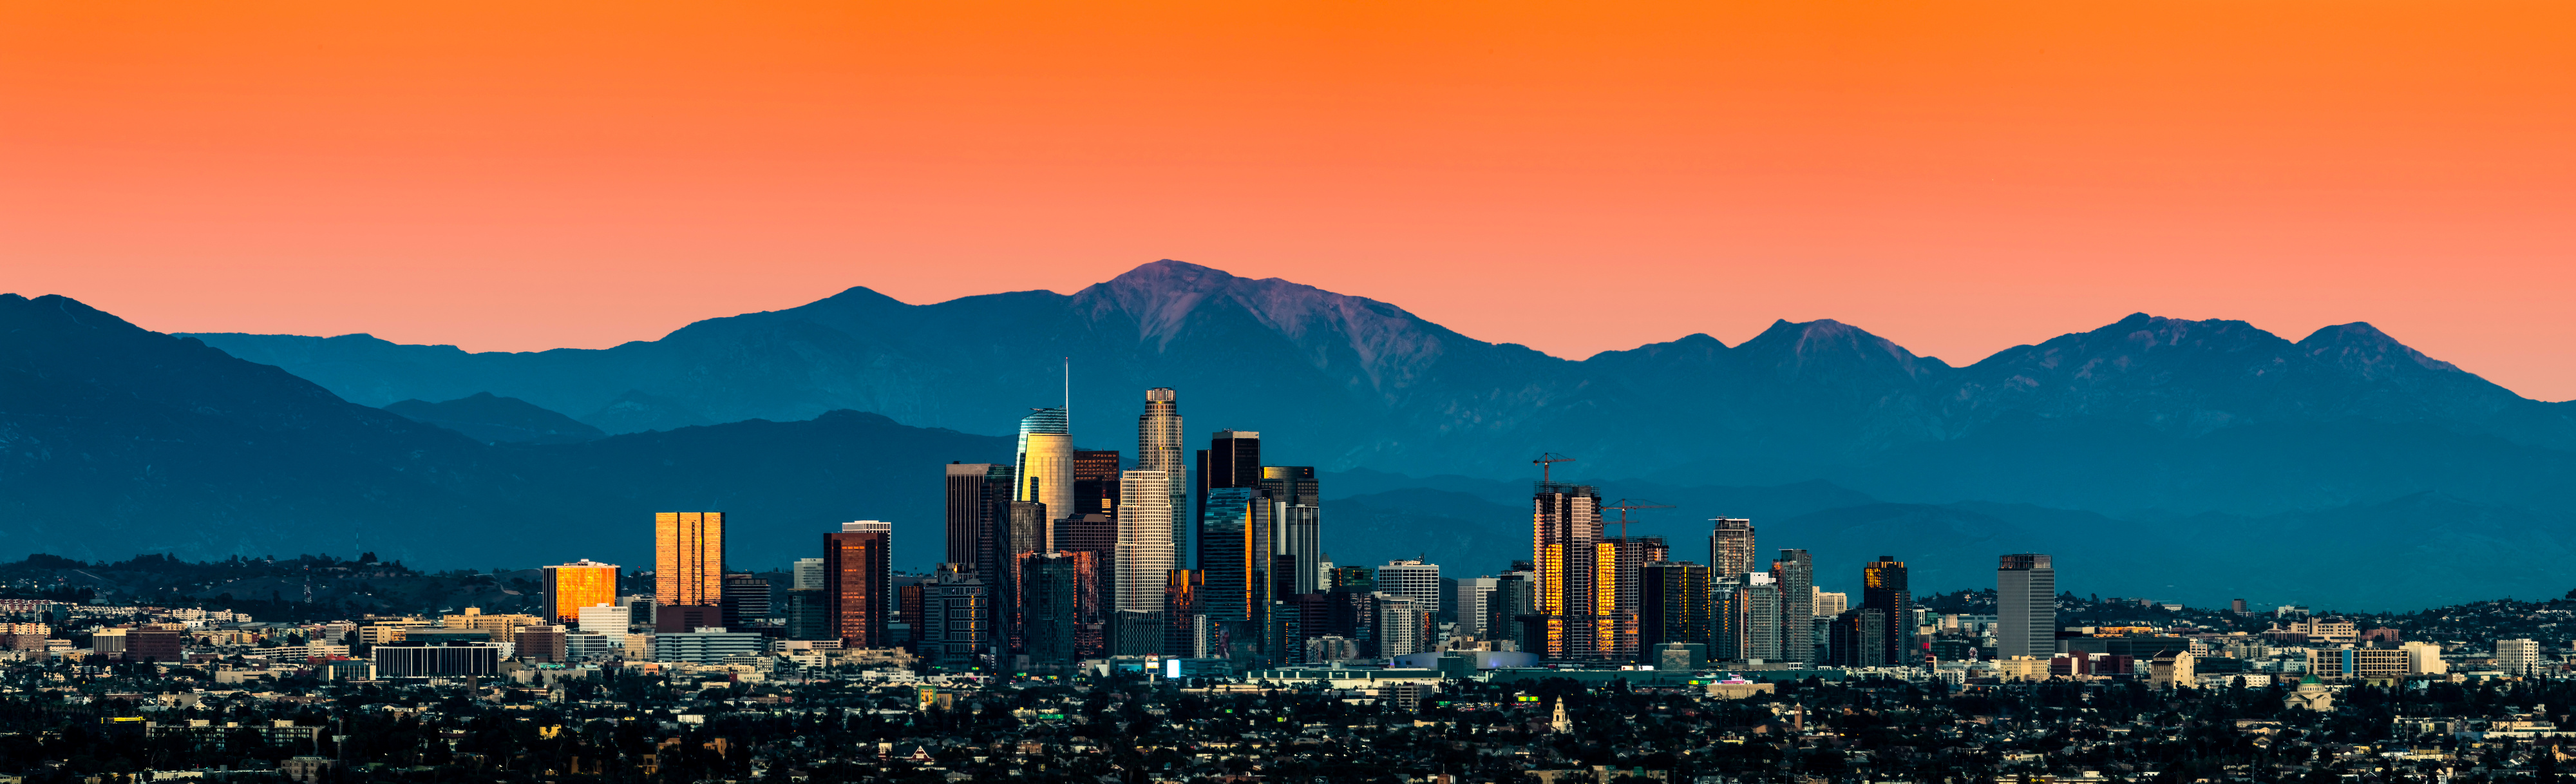 Los Angeles Skyline at sunset classic view